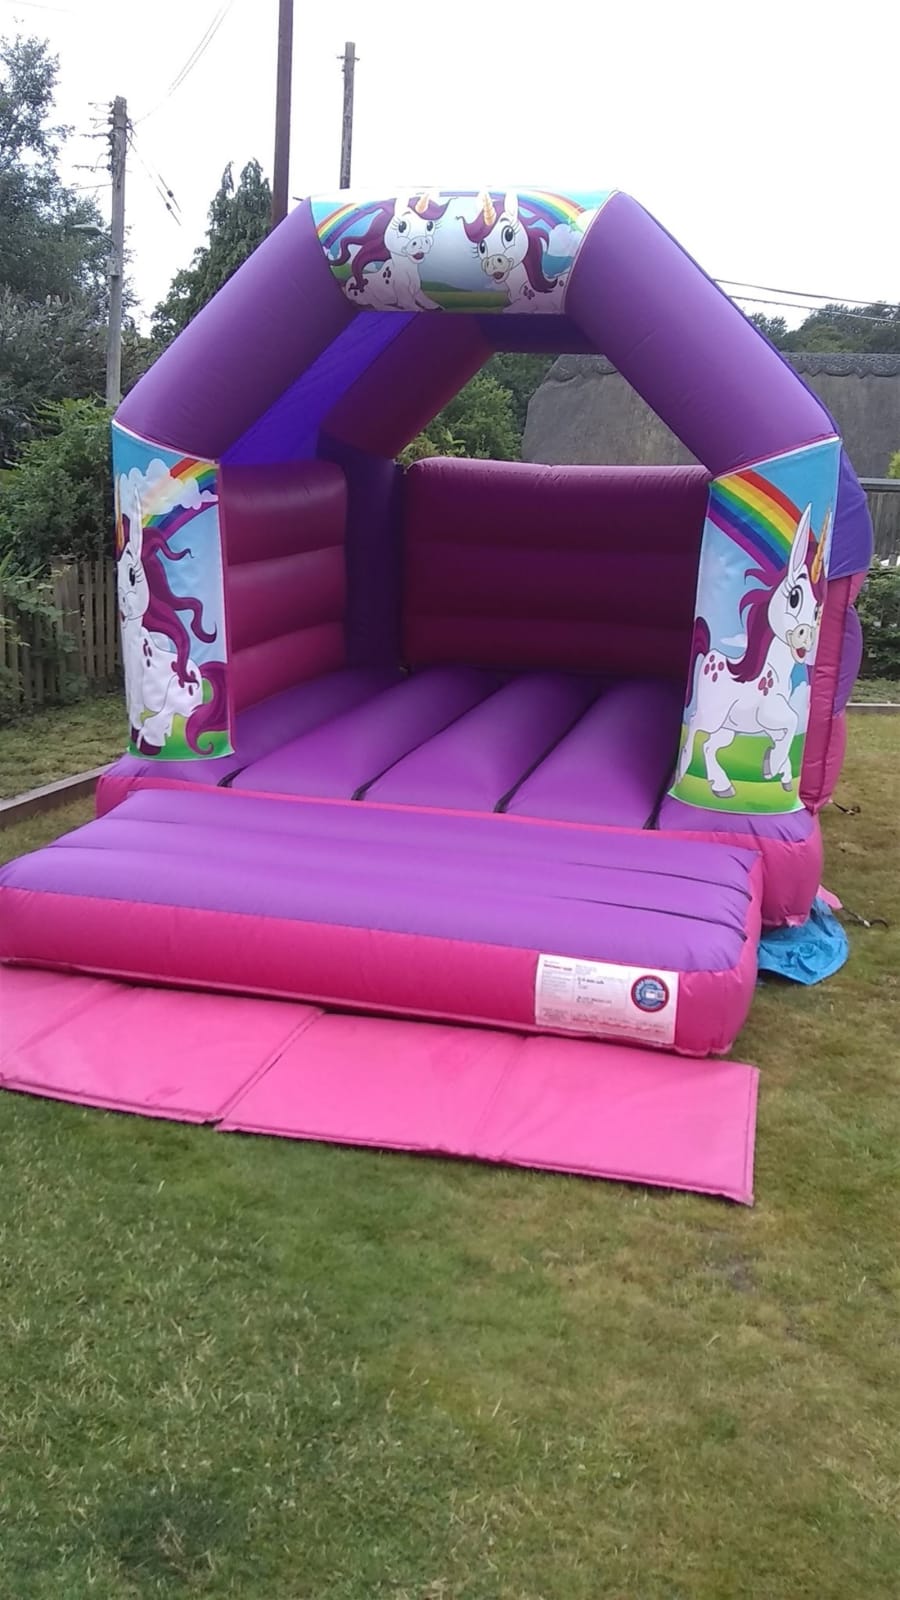 Cartoon Unicorn Bouncy Castle - Bouncy Castle Hire in Totton, Southampton,  Romsey, Eastleigh, New Forest & Hampshire